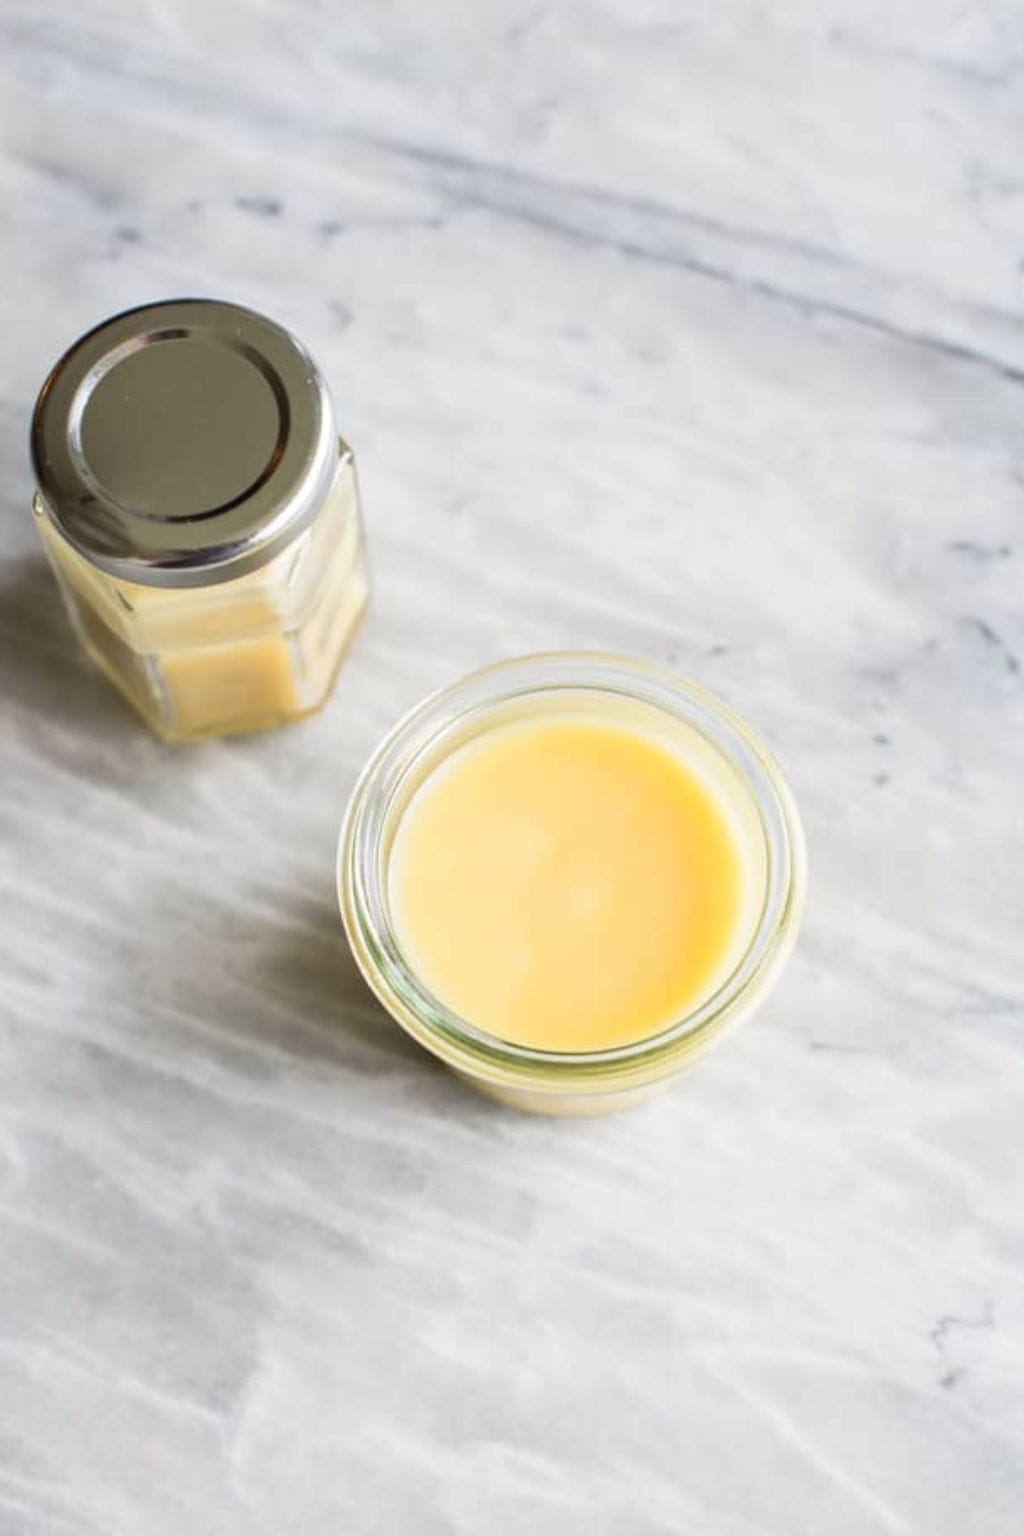 How to make a soothing bug bite balm